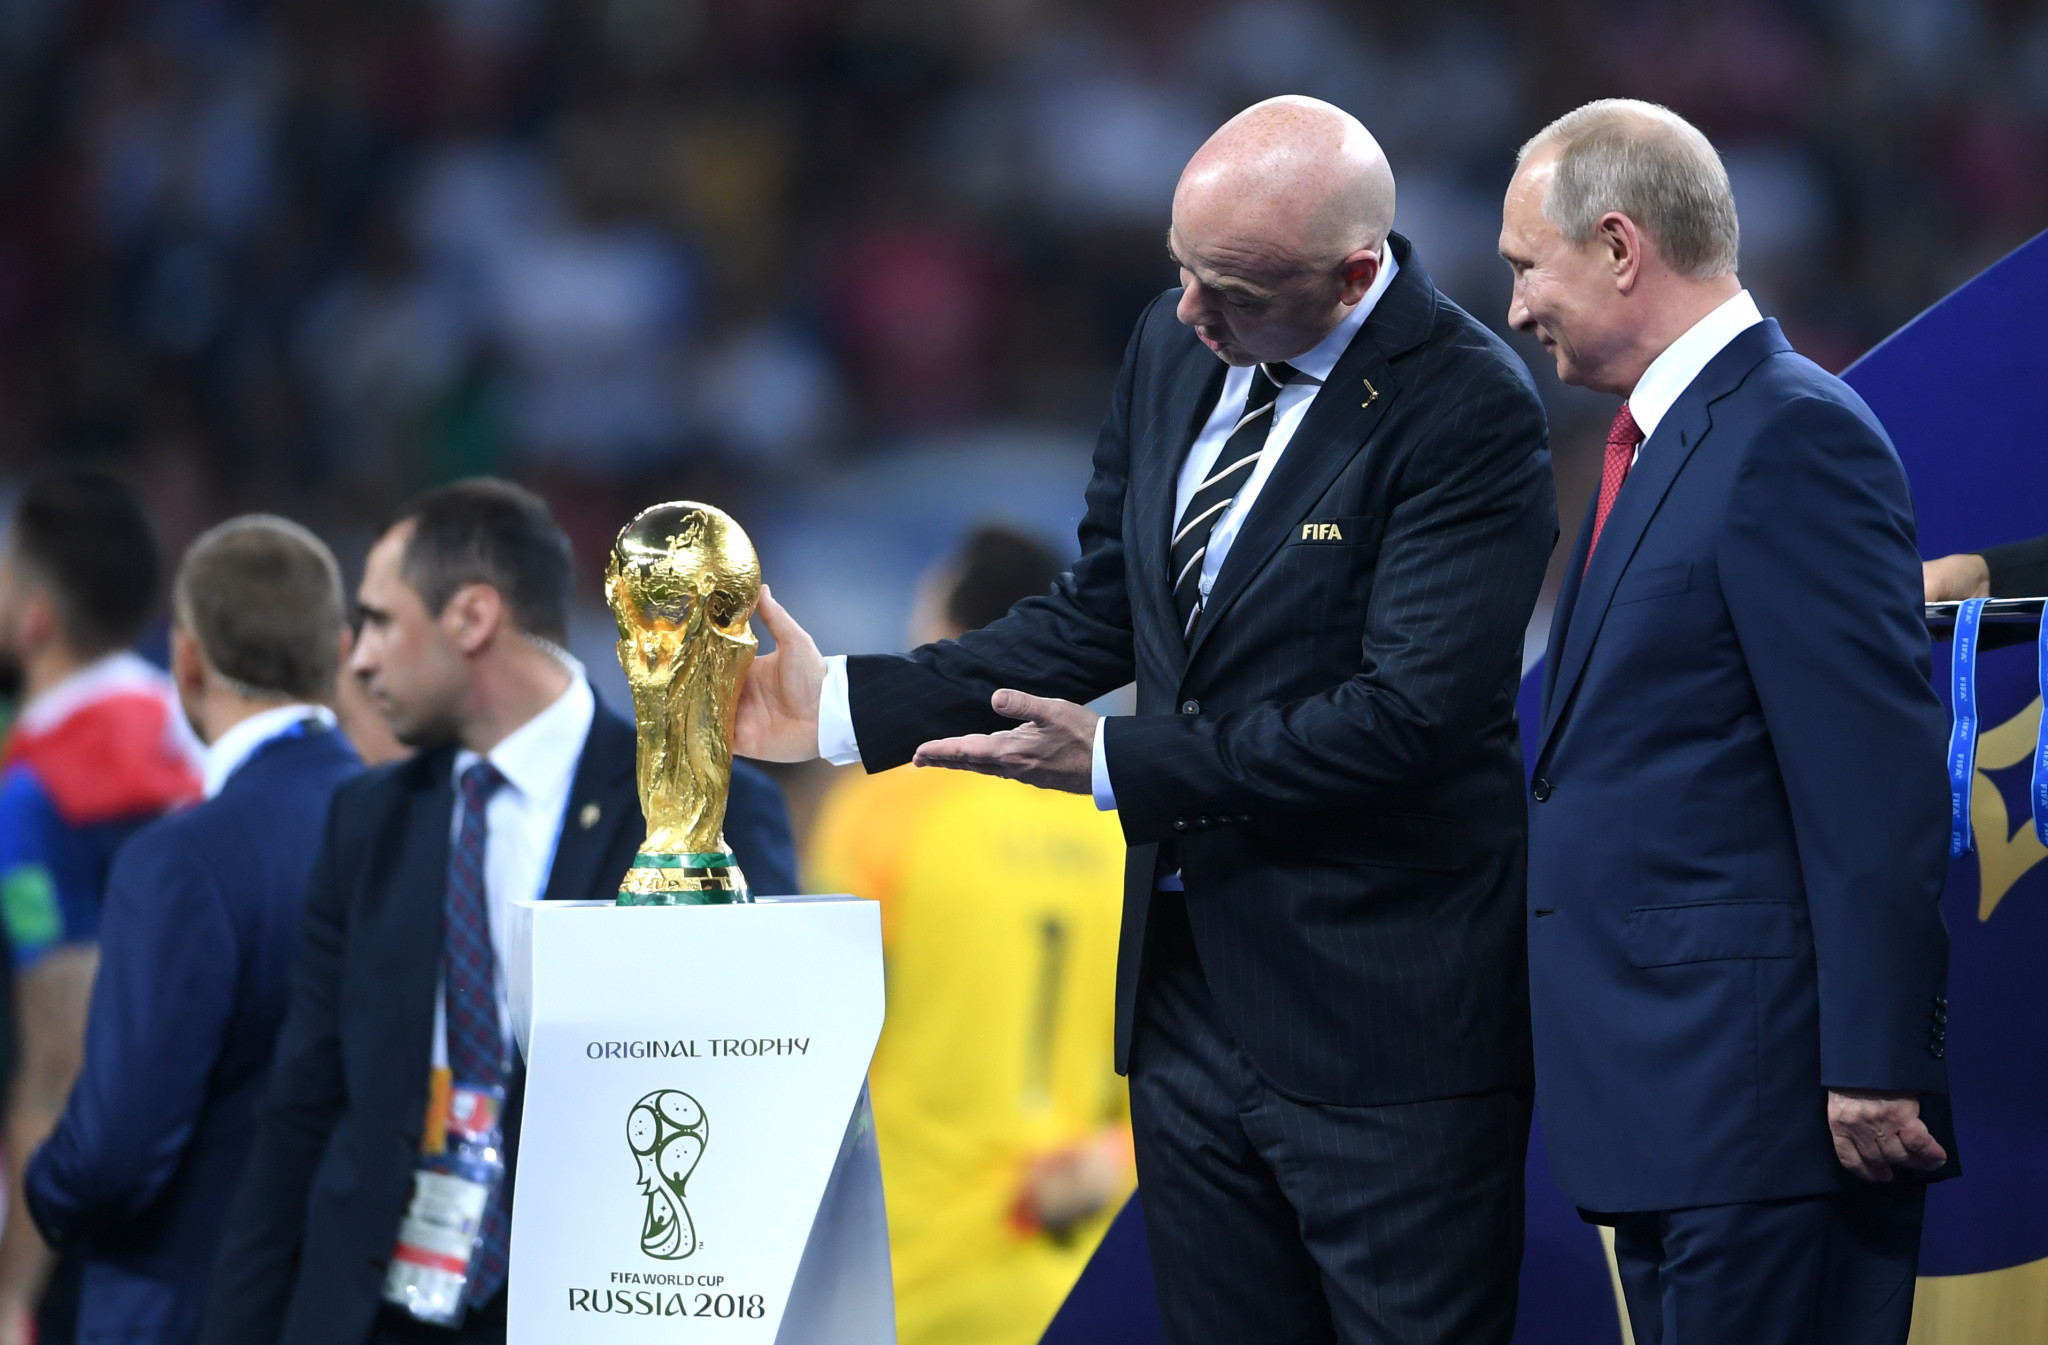 Russia hosted the last edition of the men's FIFA World Cup in 2018, but exclusion from international football competitions altogether are among further potential sanctions ©Getty Images